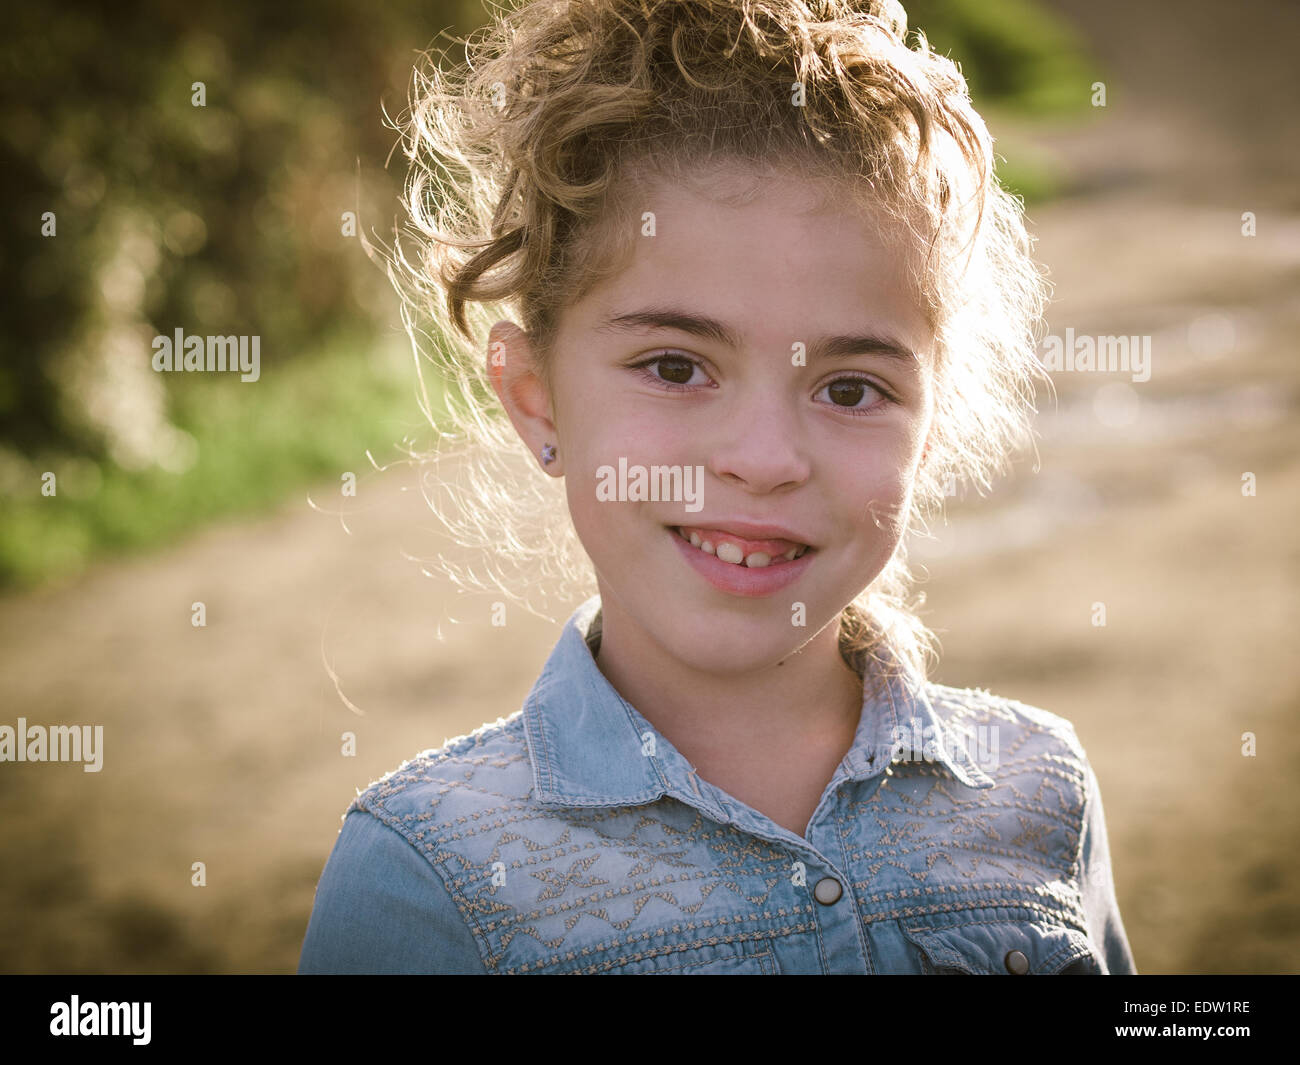 Little girl portrait with a big smile outdoors. Stock Photo